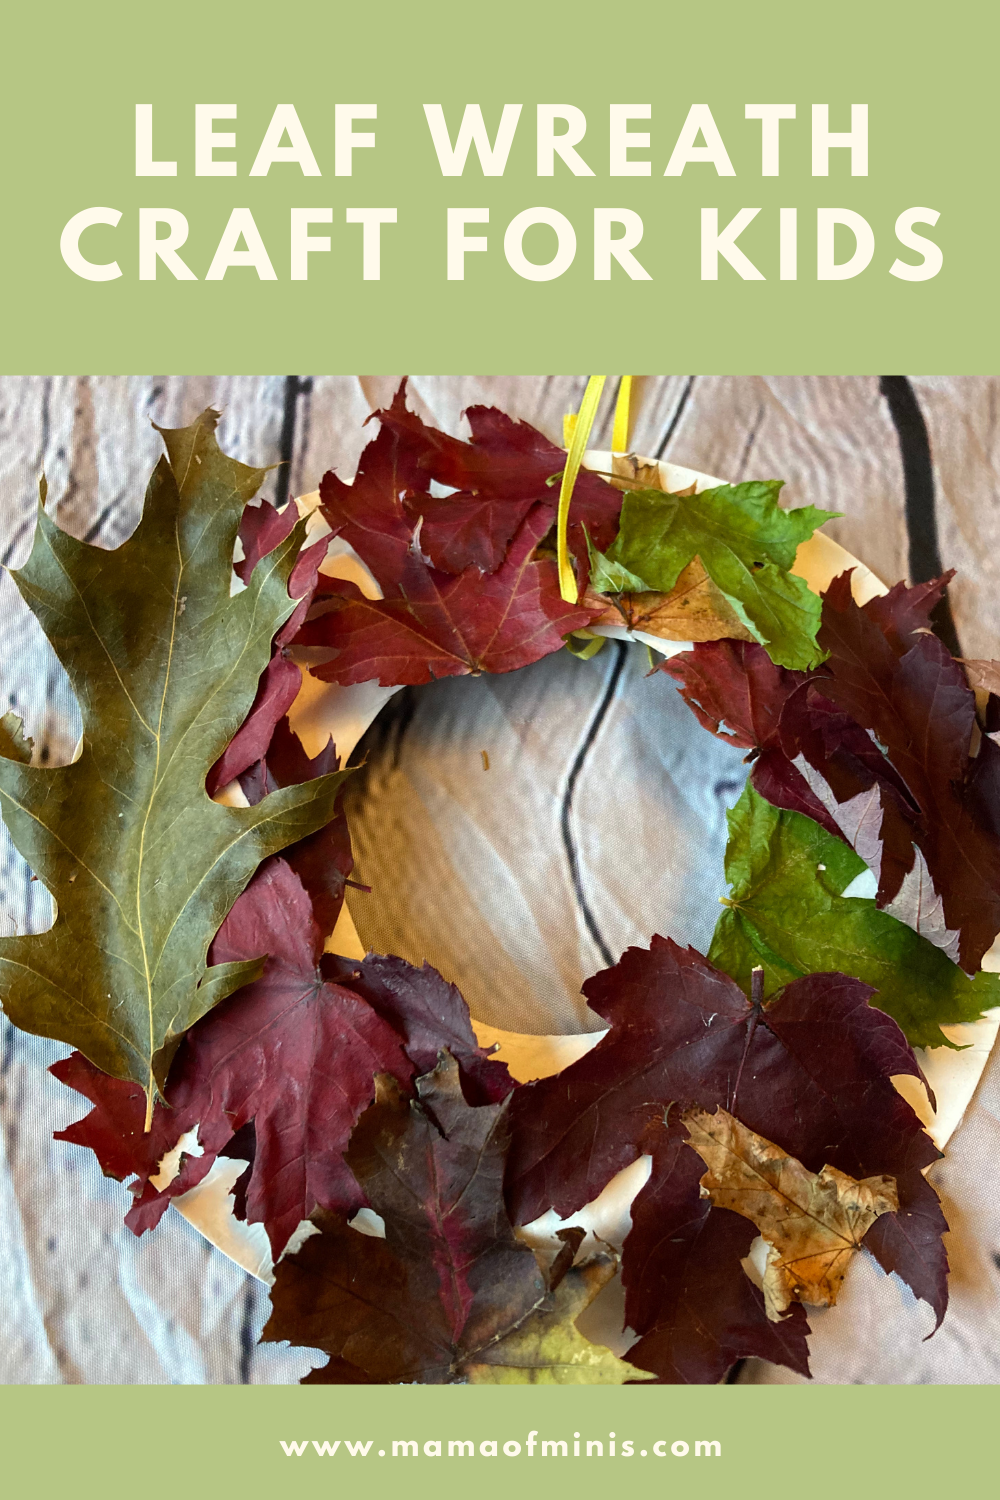 Leaf Wreath Craft for Kids Pin